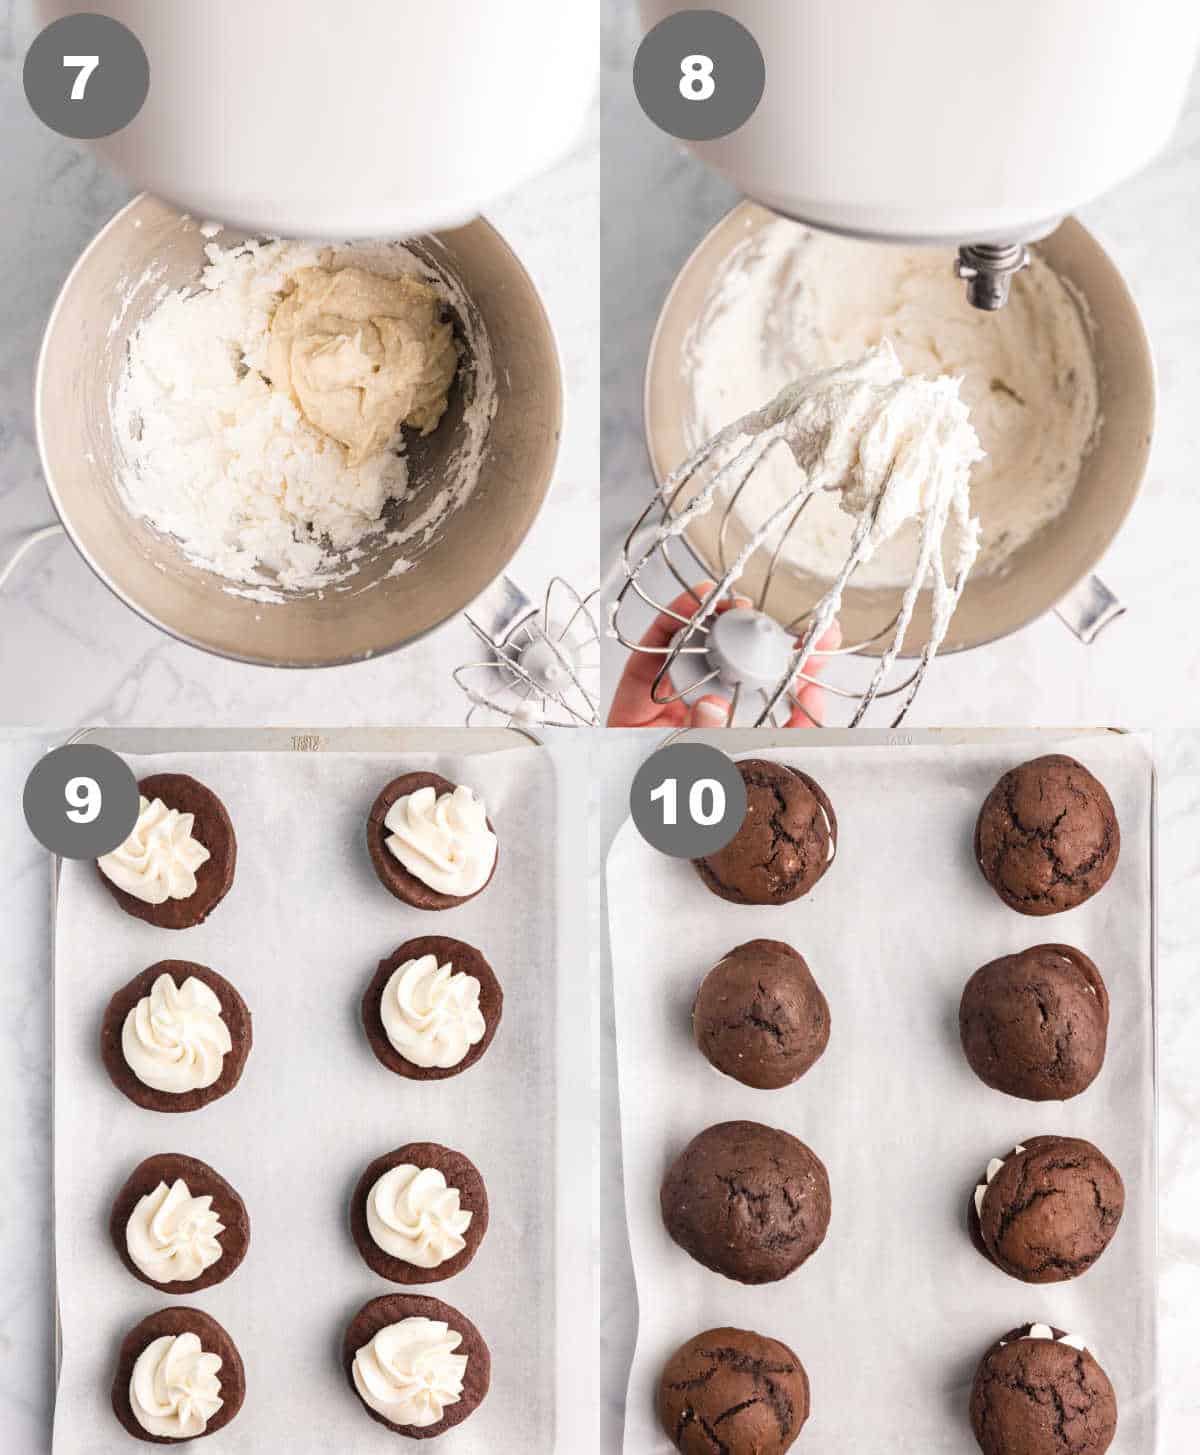 Steps 7 through 10 for making whoopie pies.